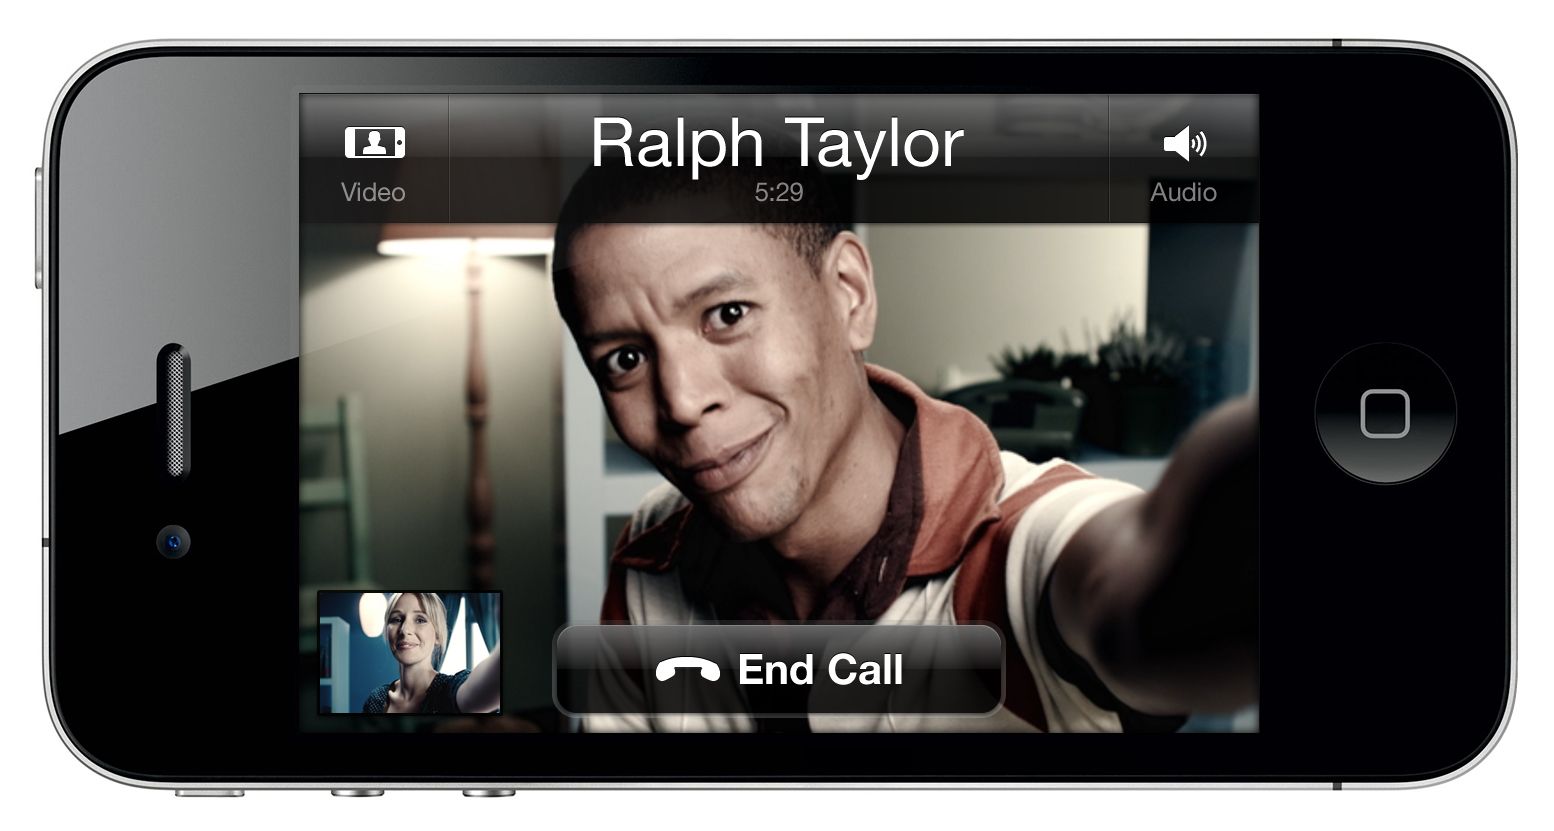 Skype video chat on iPhone